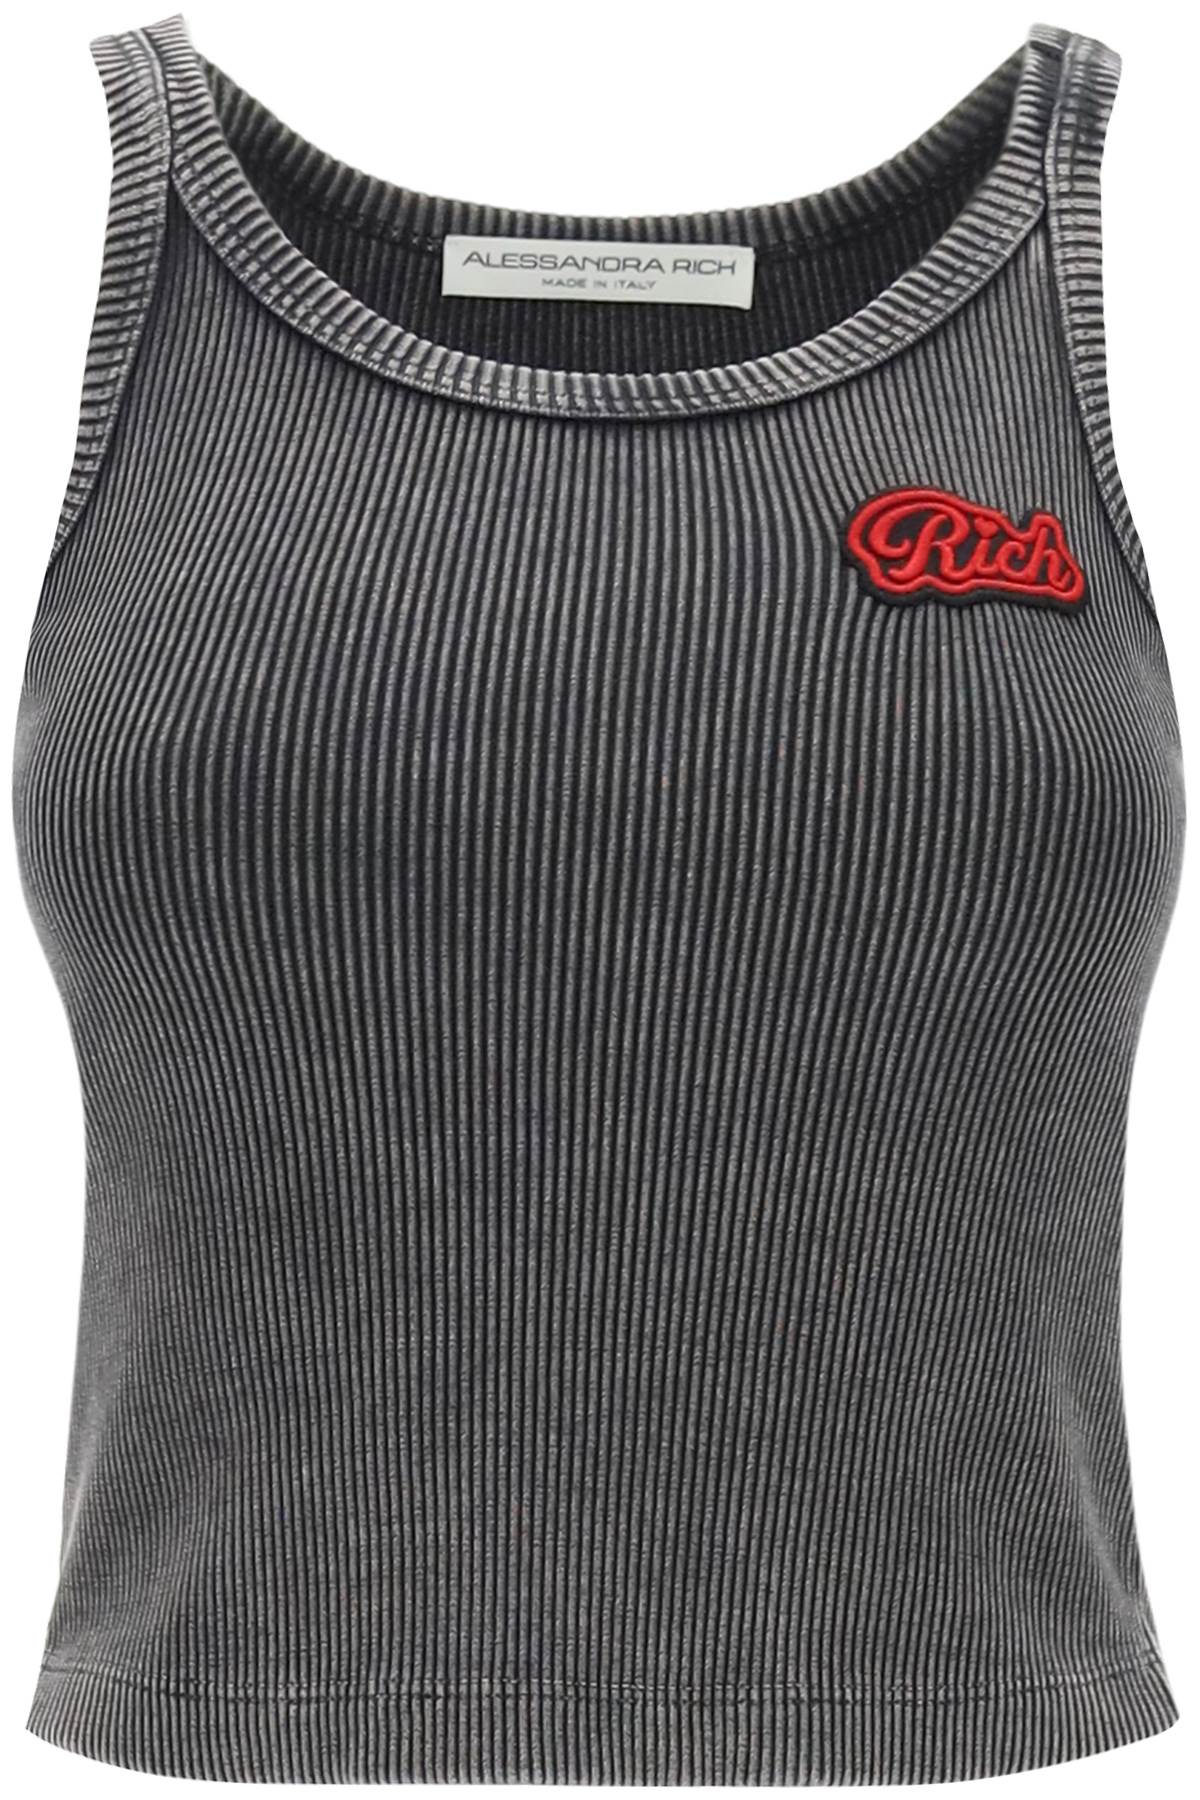 Alessandra rich ribbed tank top with logo patch-women > clothing > tops-Alessandra Rich-Urbanheer